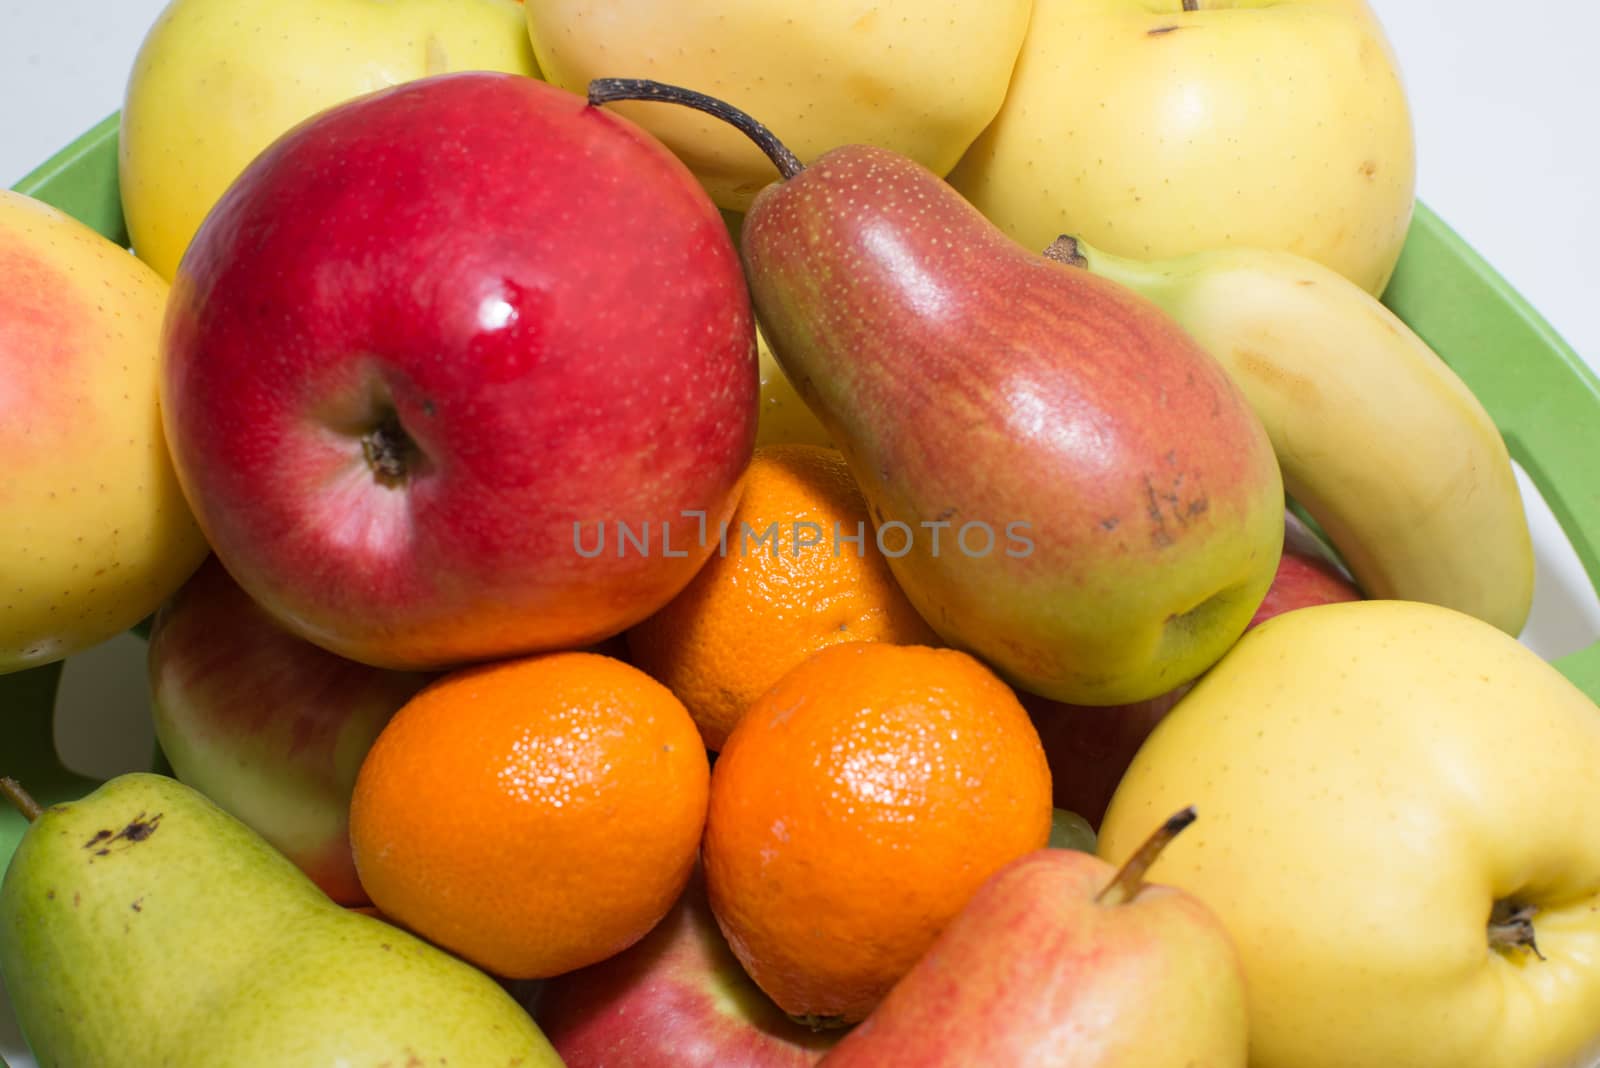 Colored fruits on table.